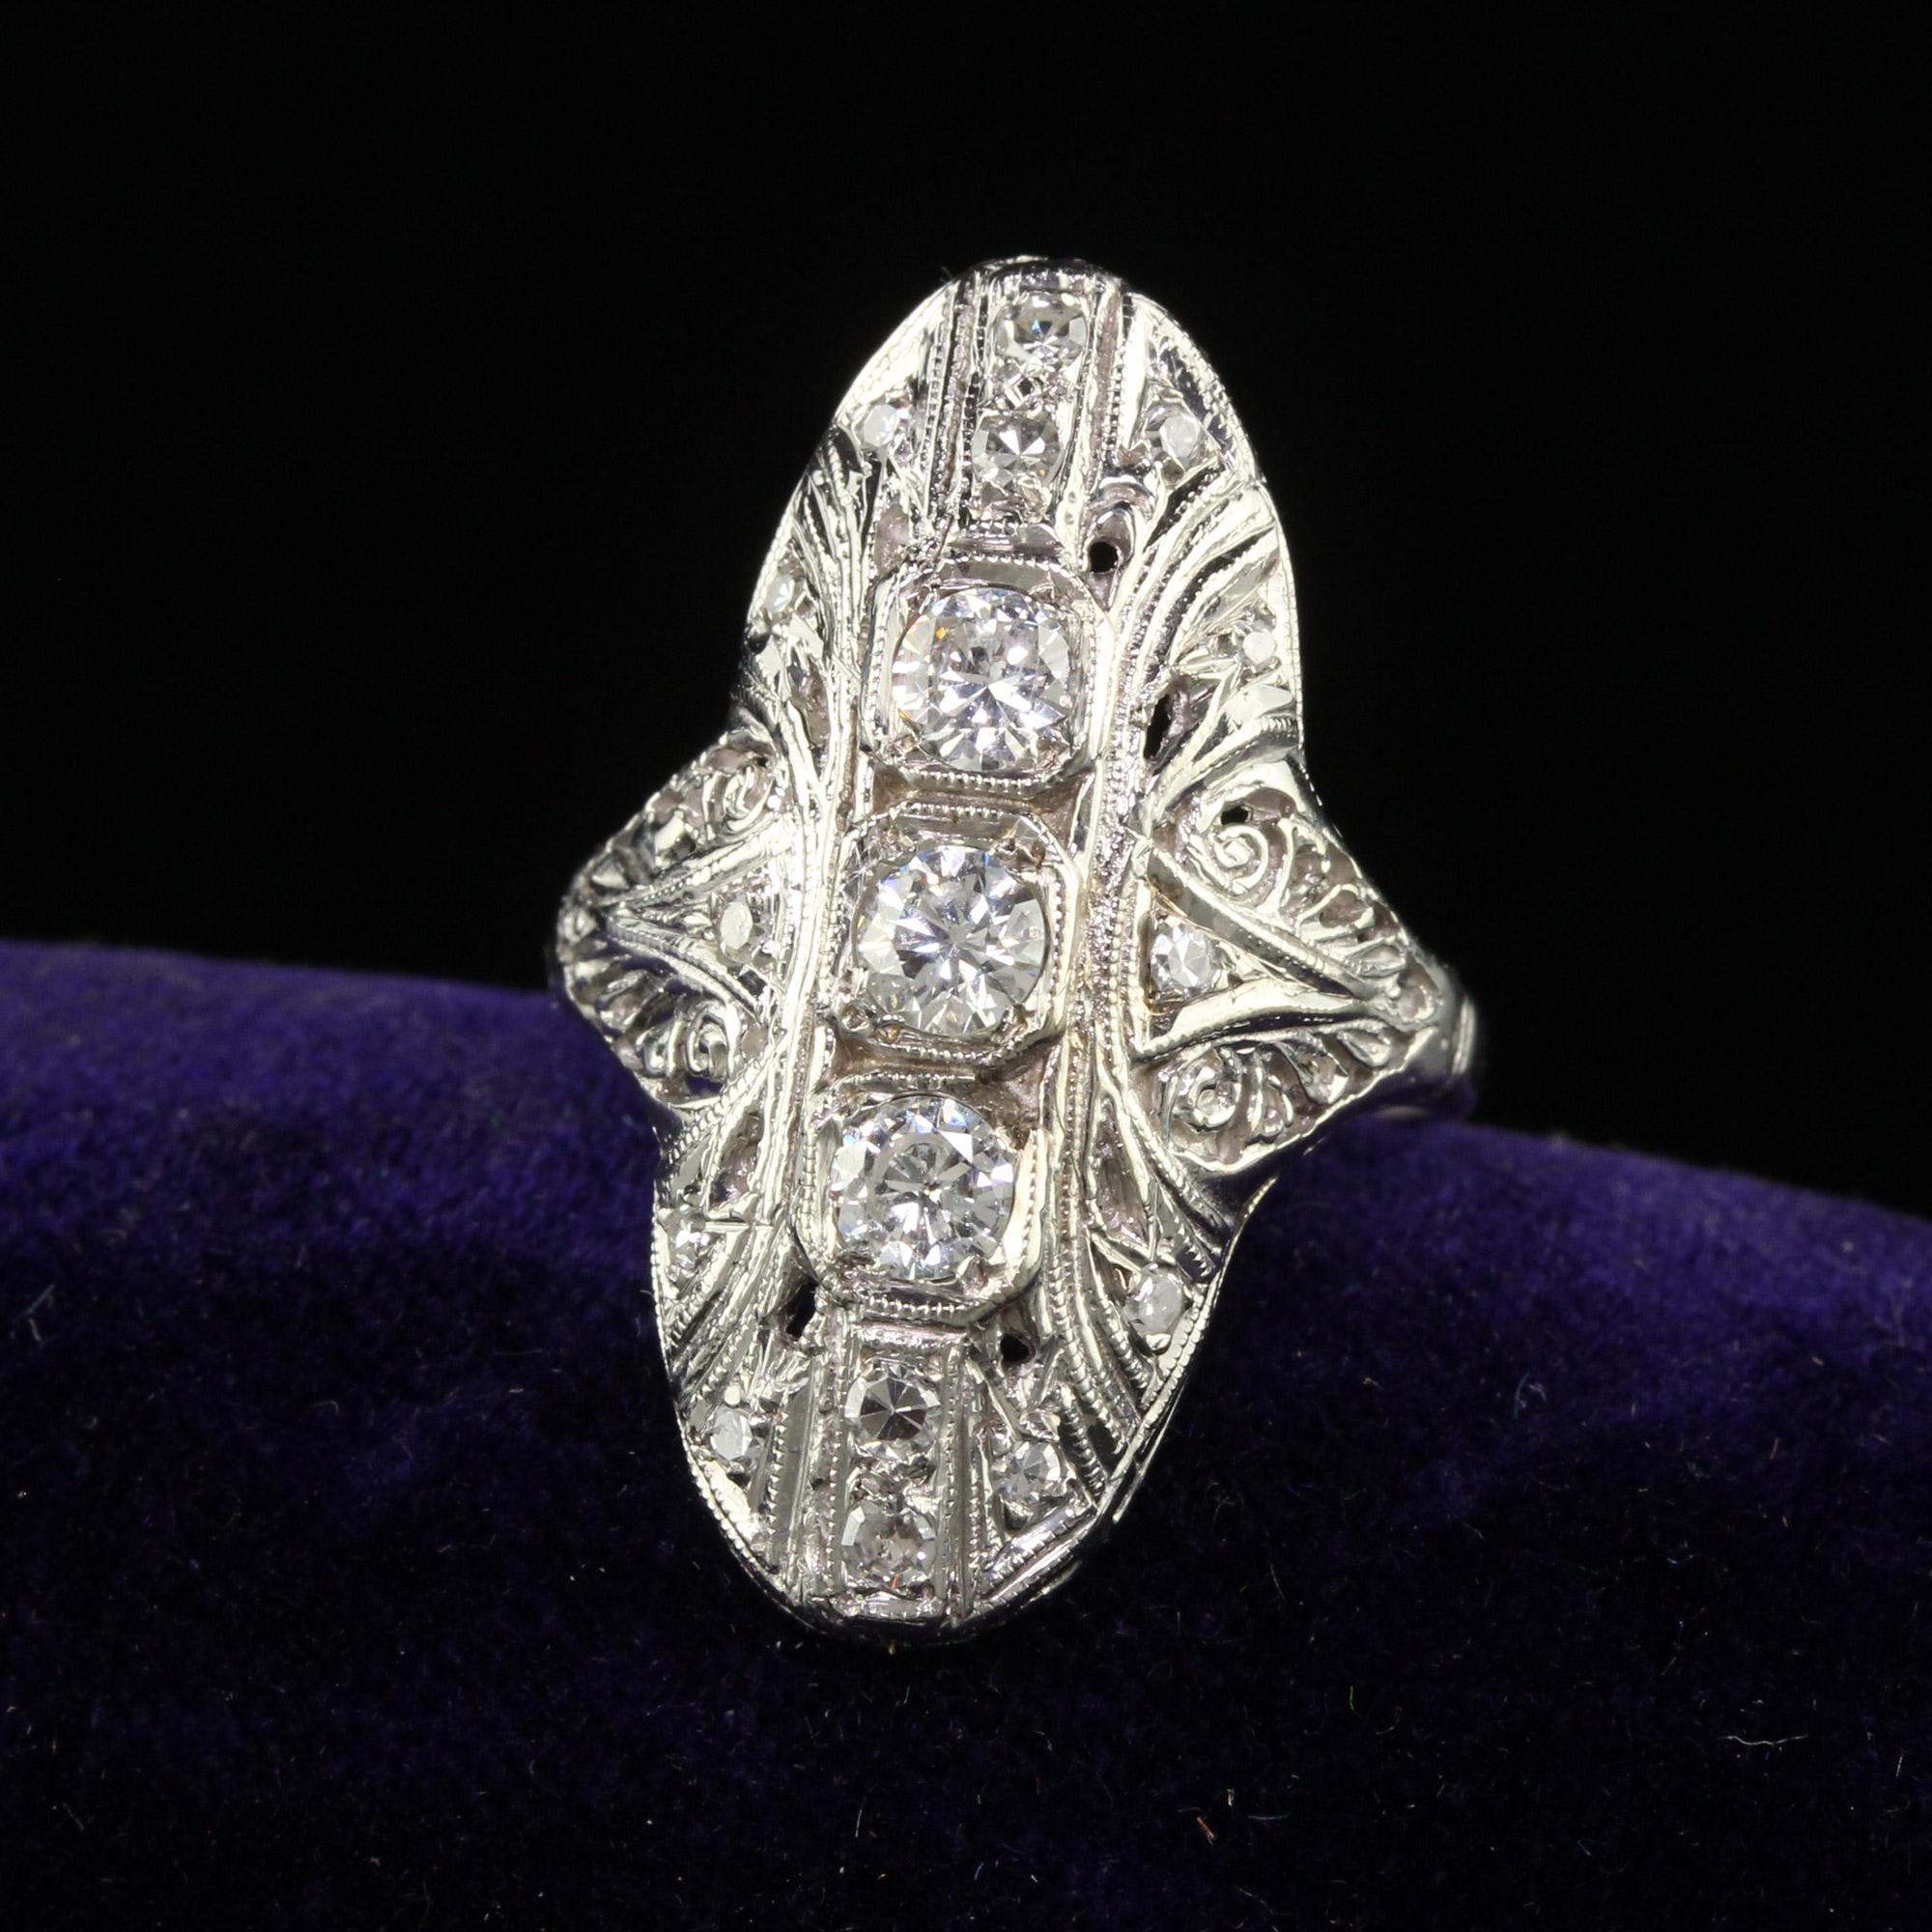 Beautiful Antique Art Deco 14K White Gold Old Cut Diamond Filigree Shield Ring. This gorgeous antique cocktail ring is crafted in 14k white gold. The ring holds beautiful white diamonds on top of the ring and sits low on the finger. The ring is in